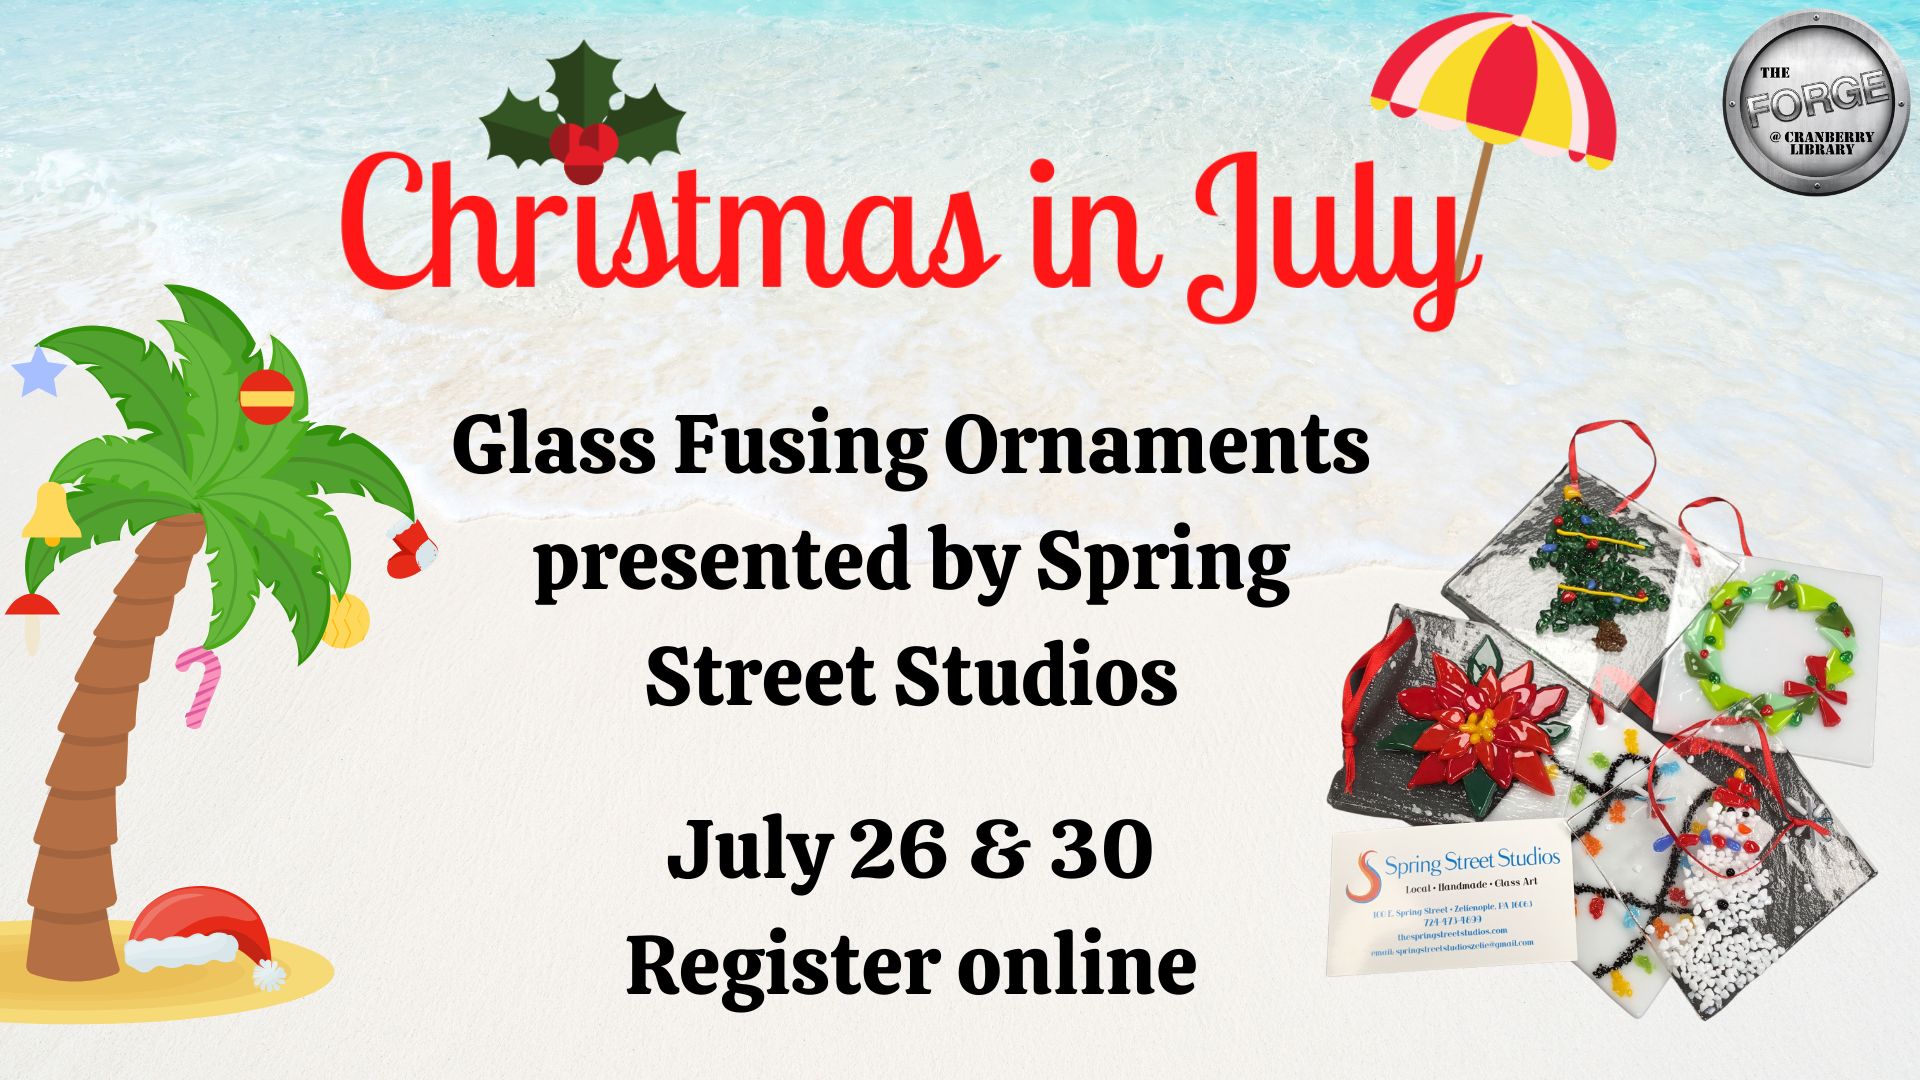 Flyer for Christmas In July Glass Fusing Ornaments